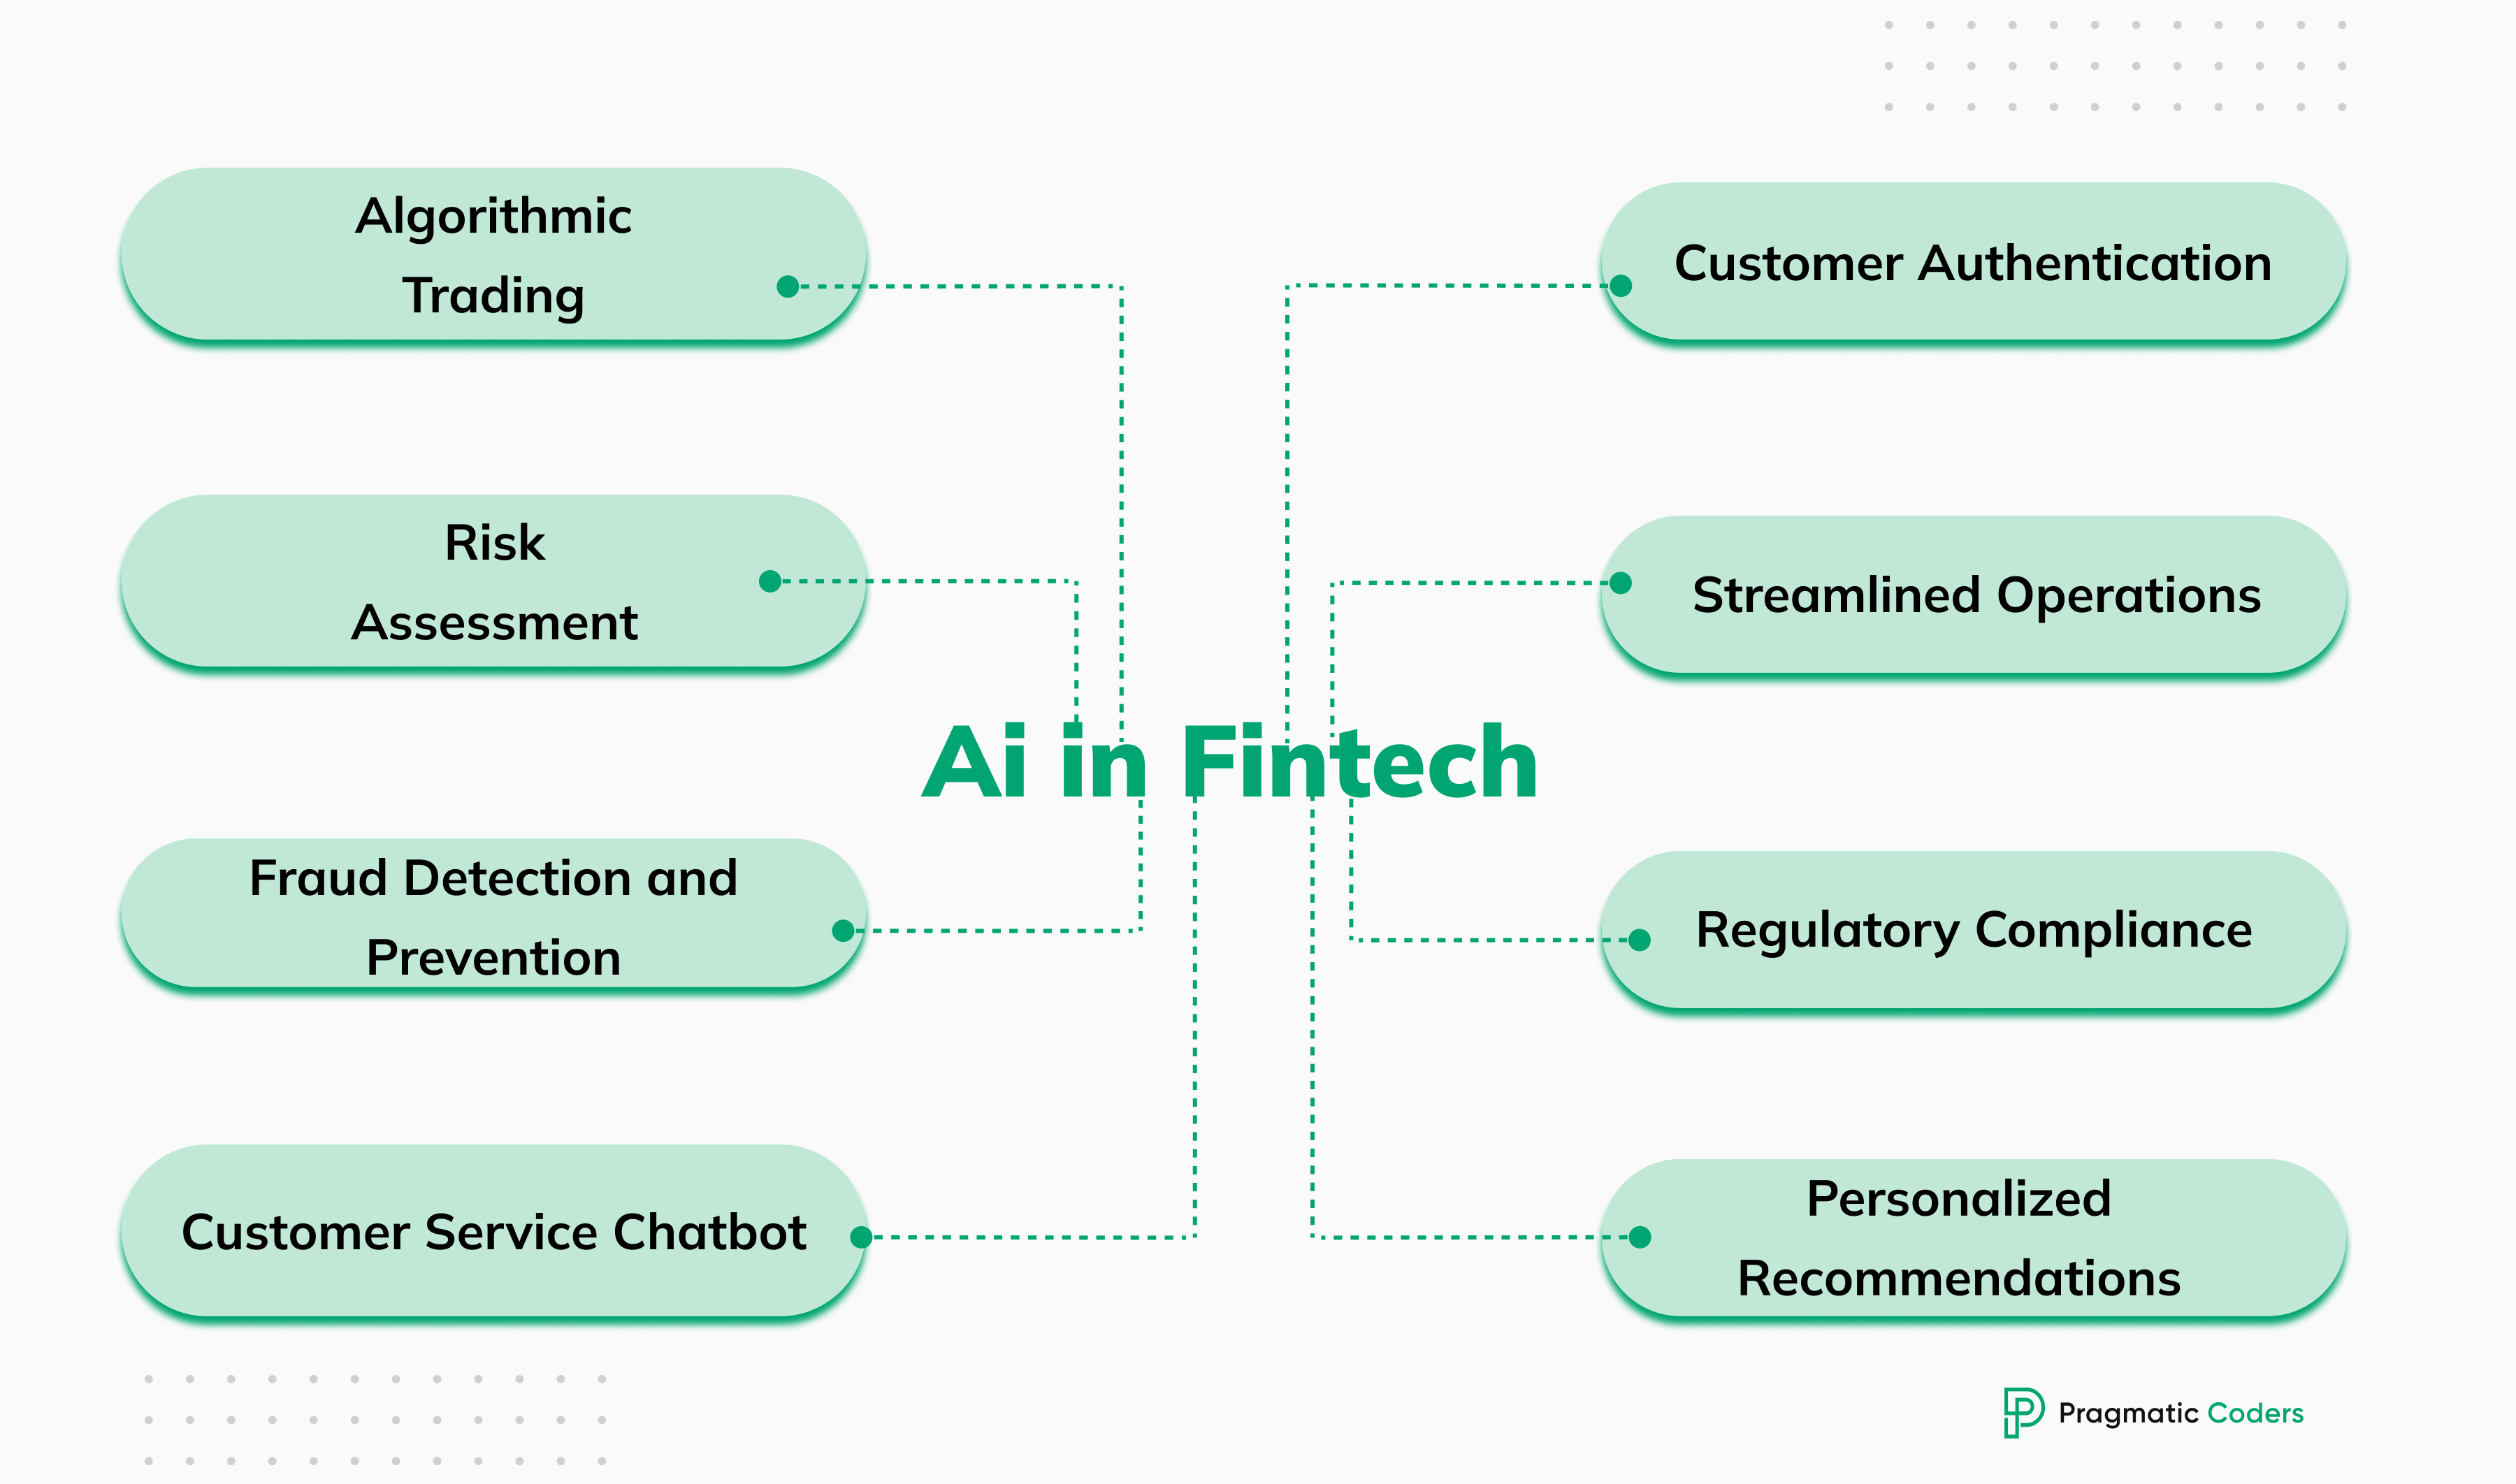 Uses of AI in fintech